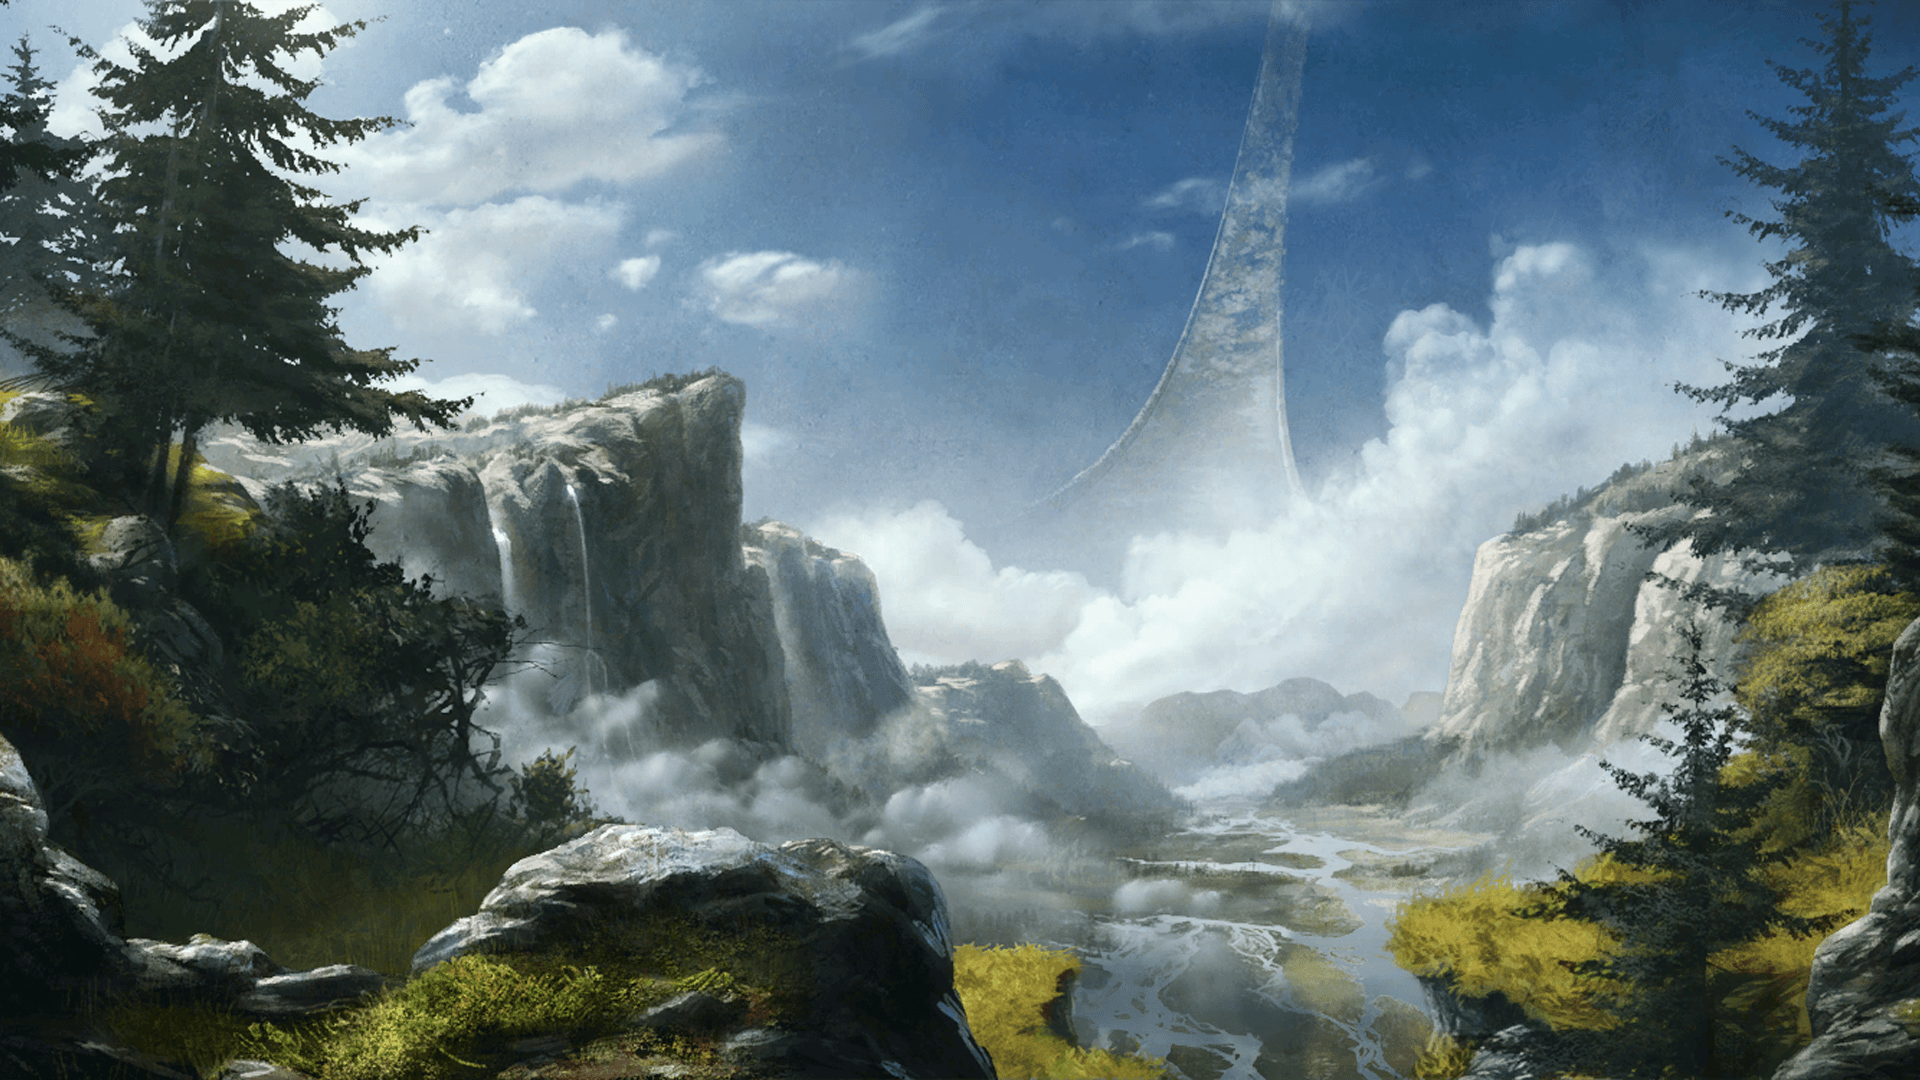 Xbox Game Studios Halo Video Games Video Game Art Sky Landscape Nature Science Fiction 1920x1080